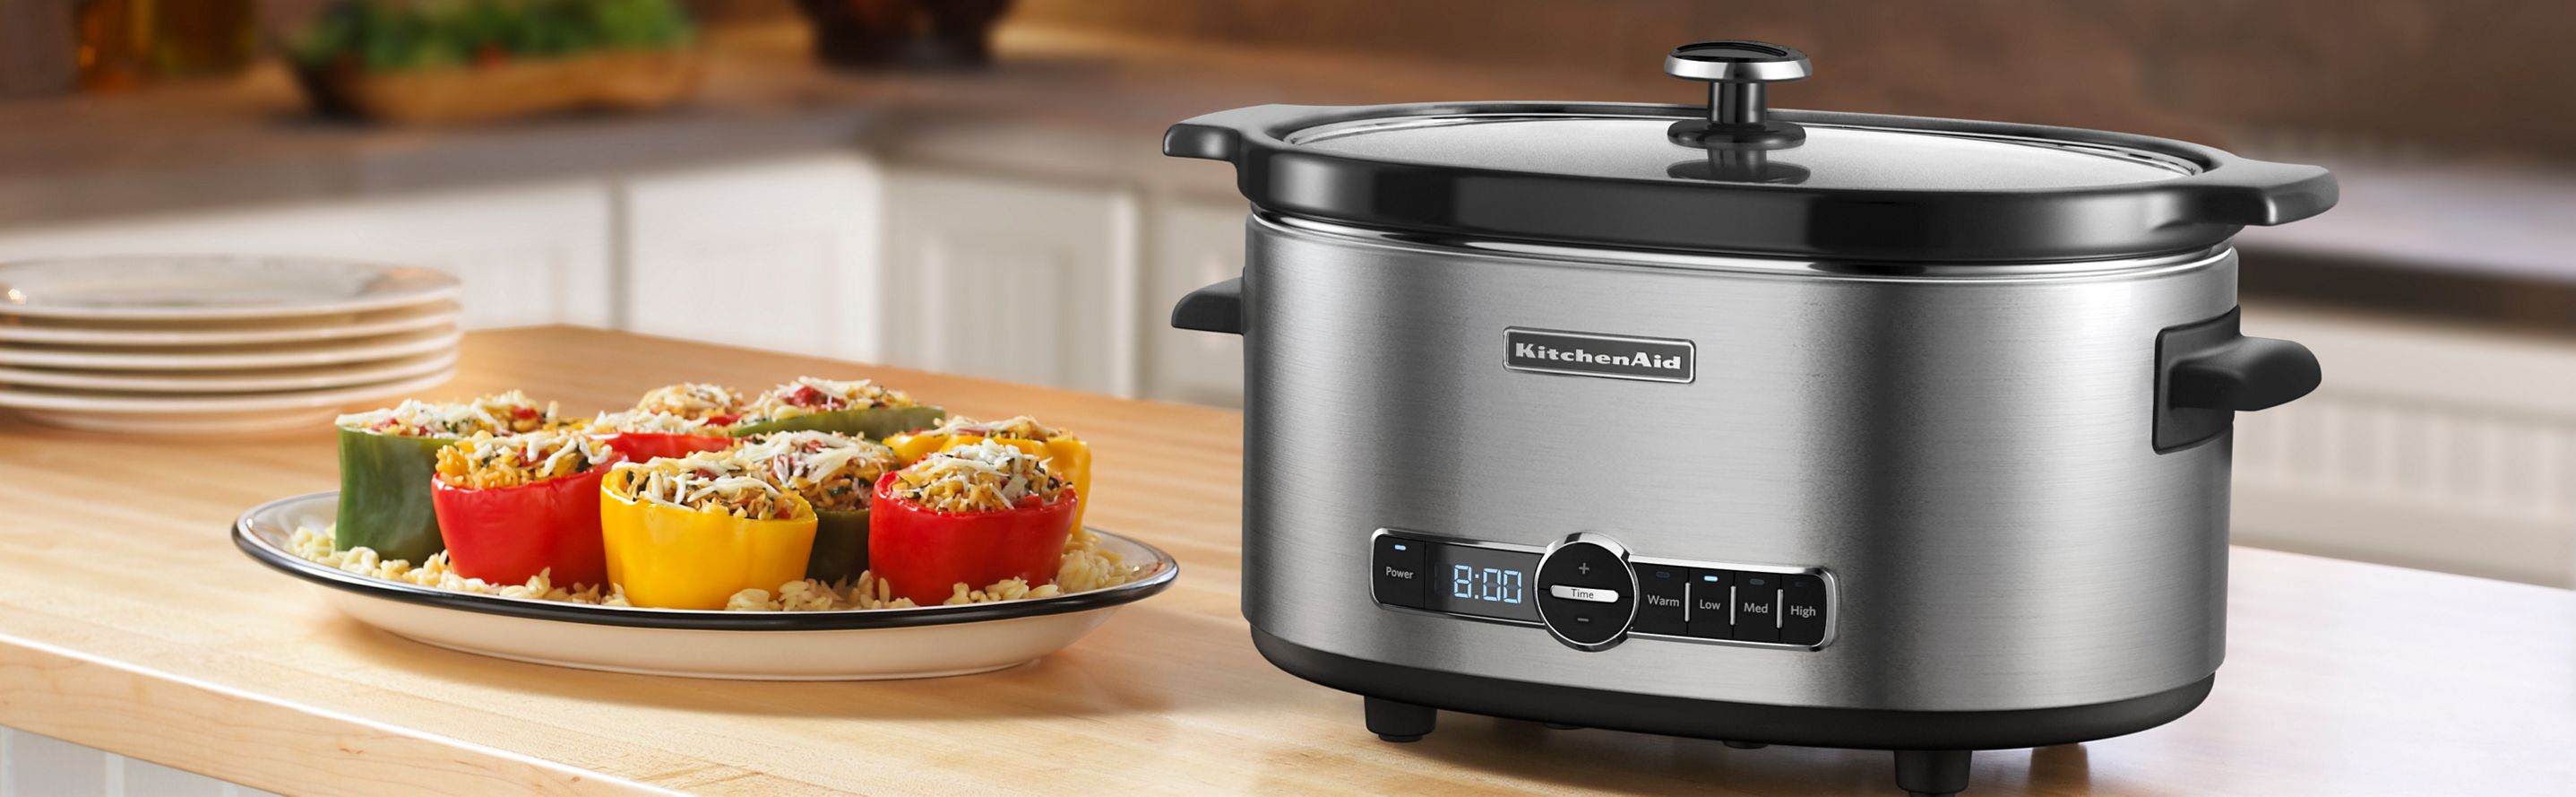 A KitchenAid slow cooker sitting on a countertop next to a plate of prepared stuffed peppers.